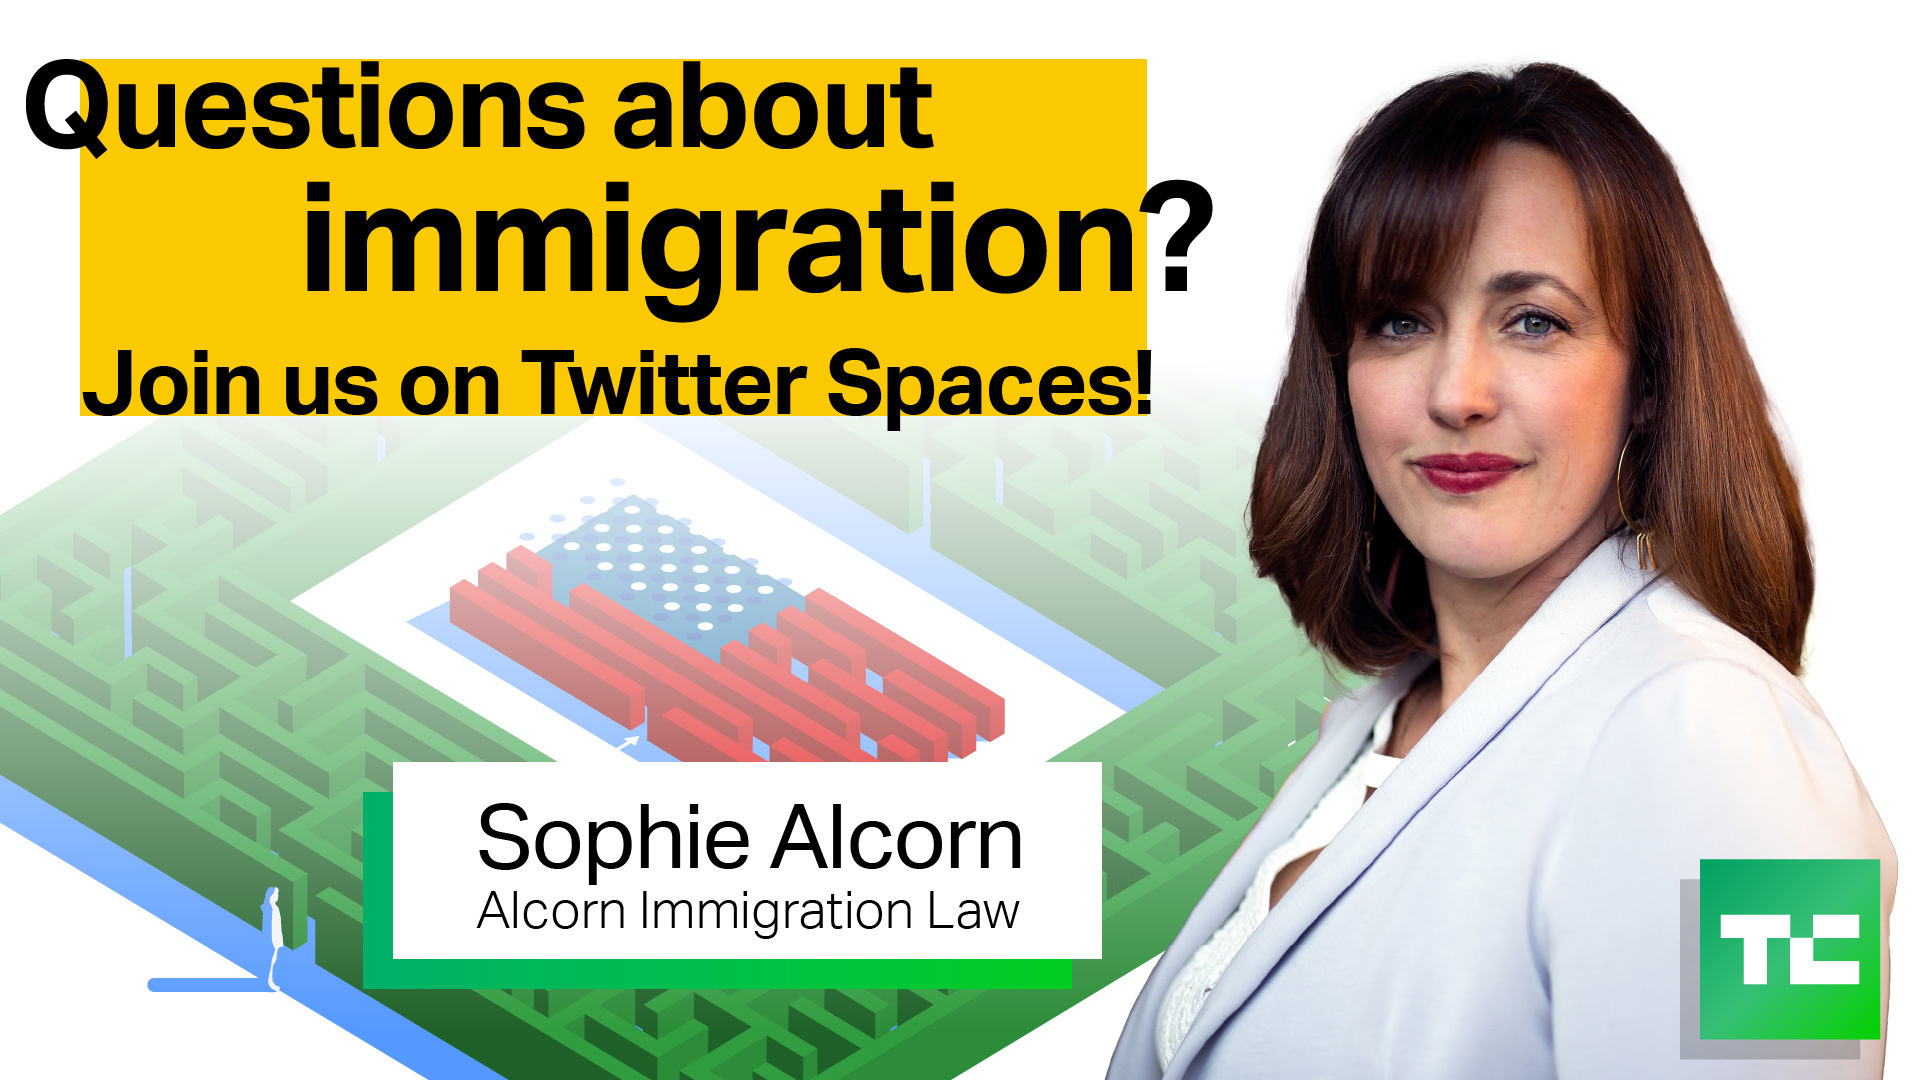 TechCrunch columnist Sophie Alcorn will join a TechCrunch+ Twitter Space on Tuesday, May 24.